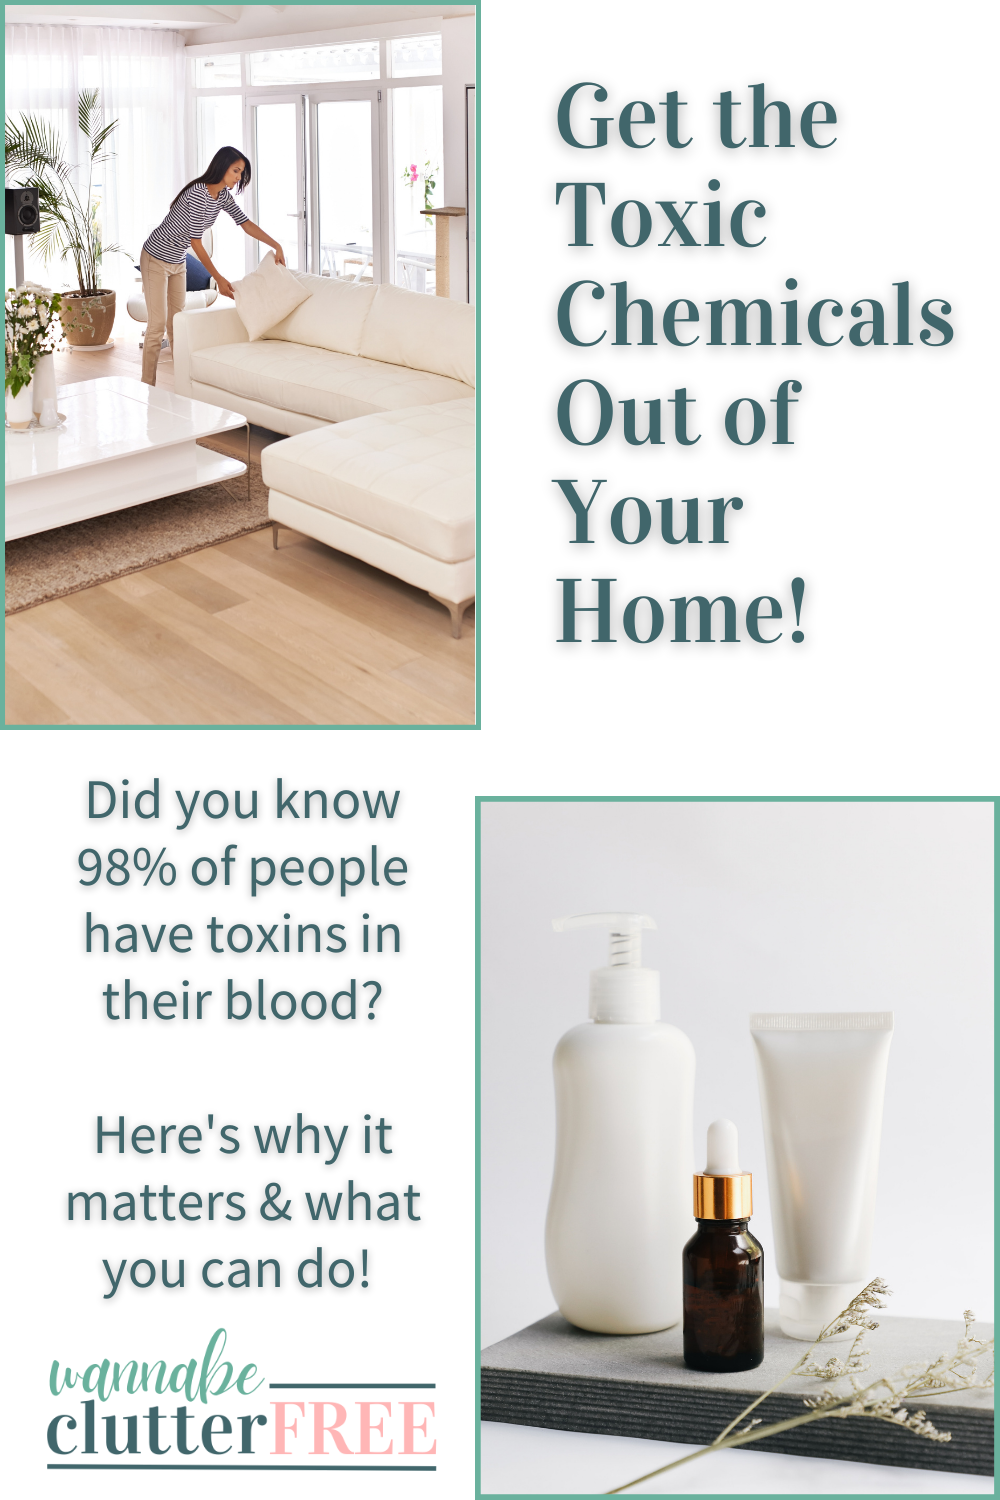 Get the toxic chemicals out of your home!